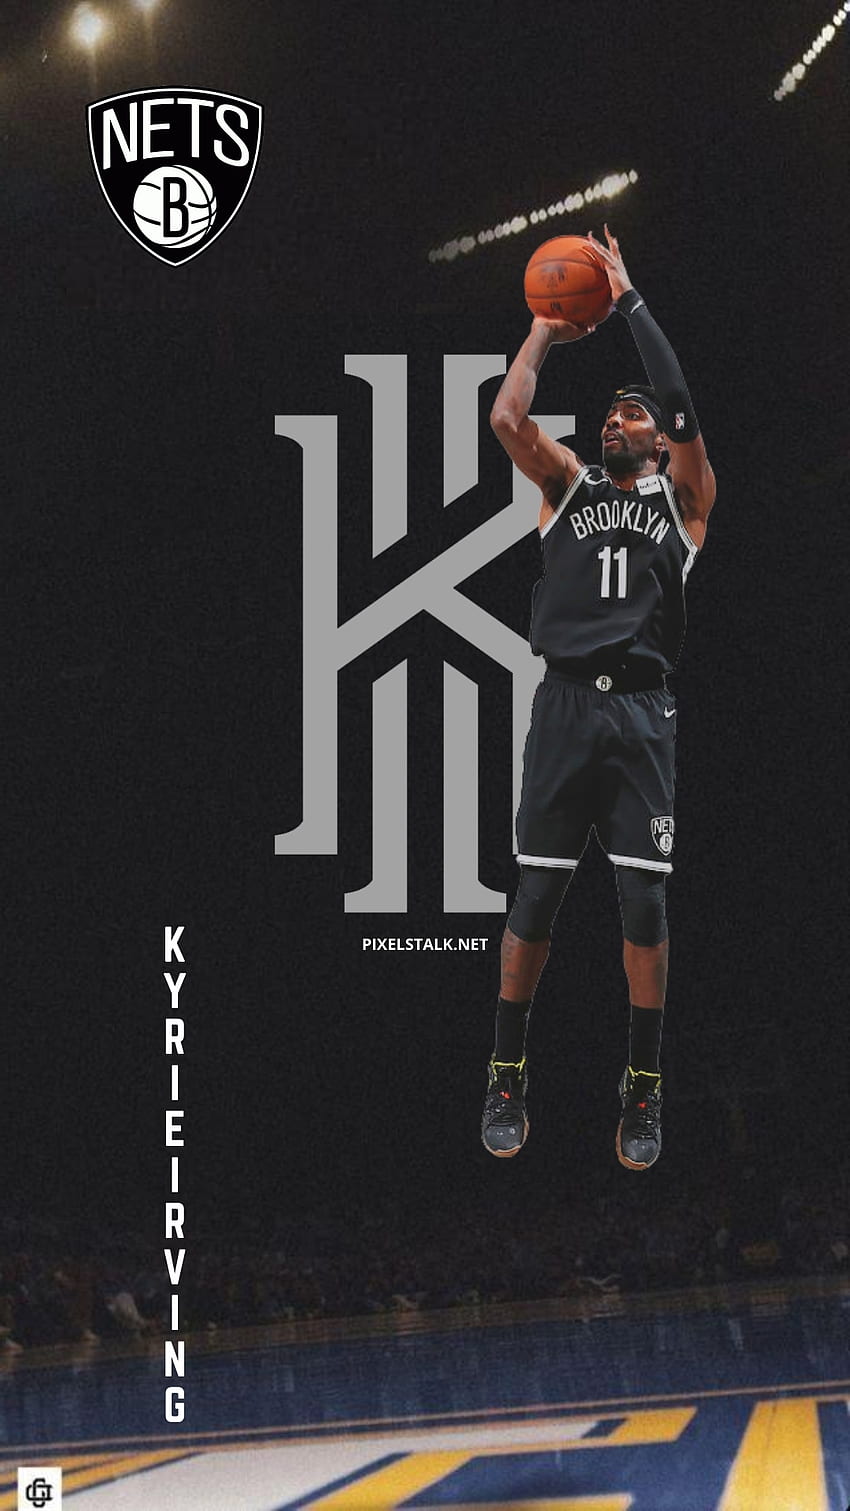 Share 74+ kyrie irving wallpaper nets latest - in.cdgdbentre